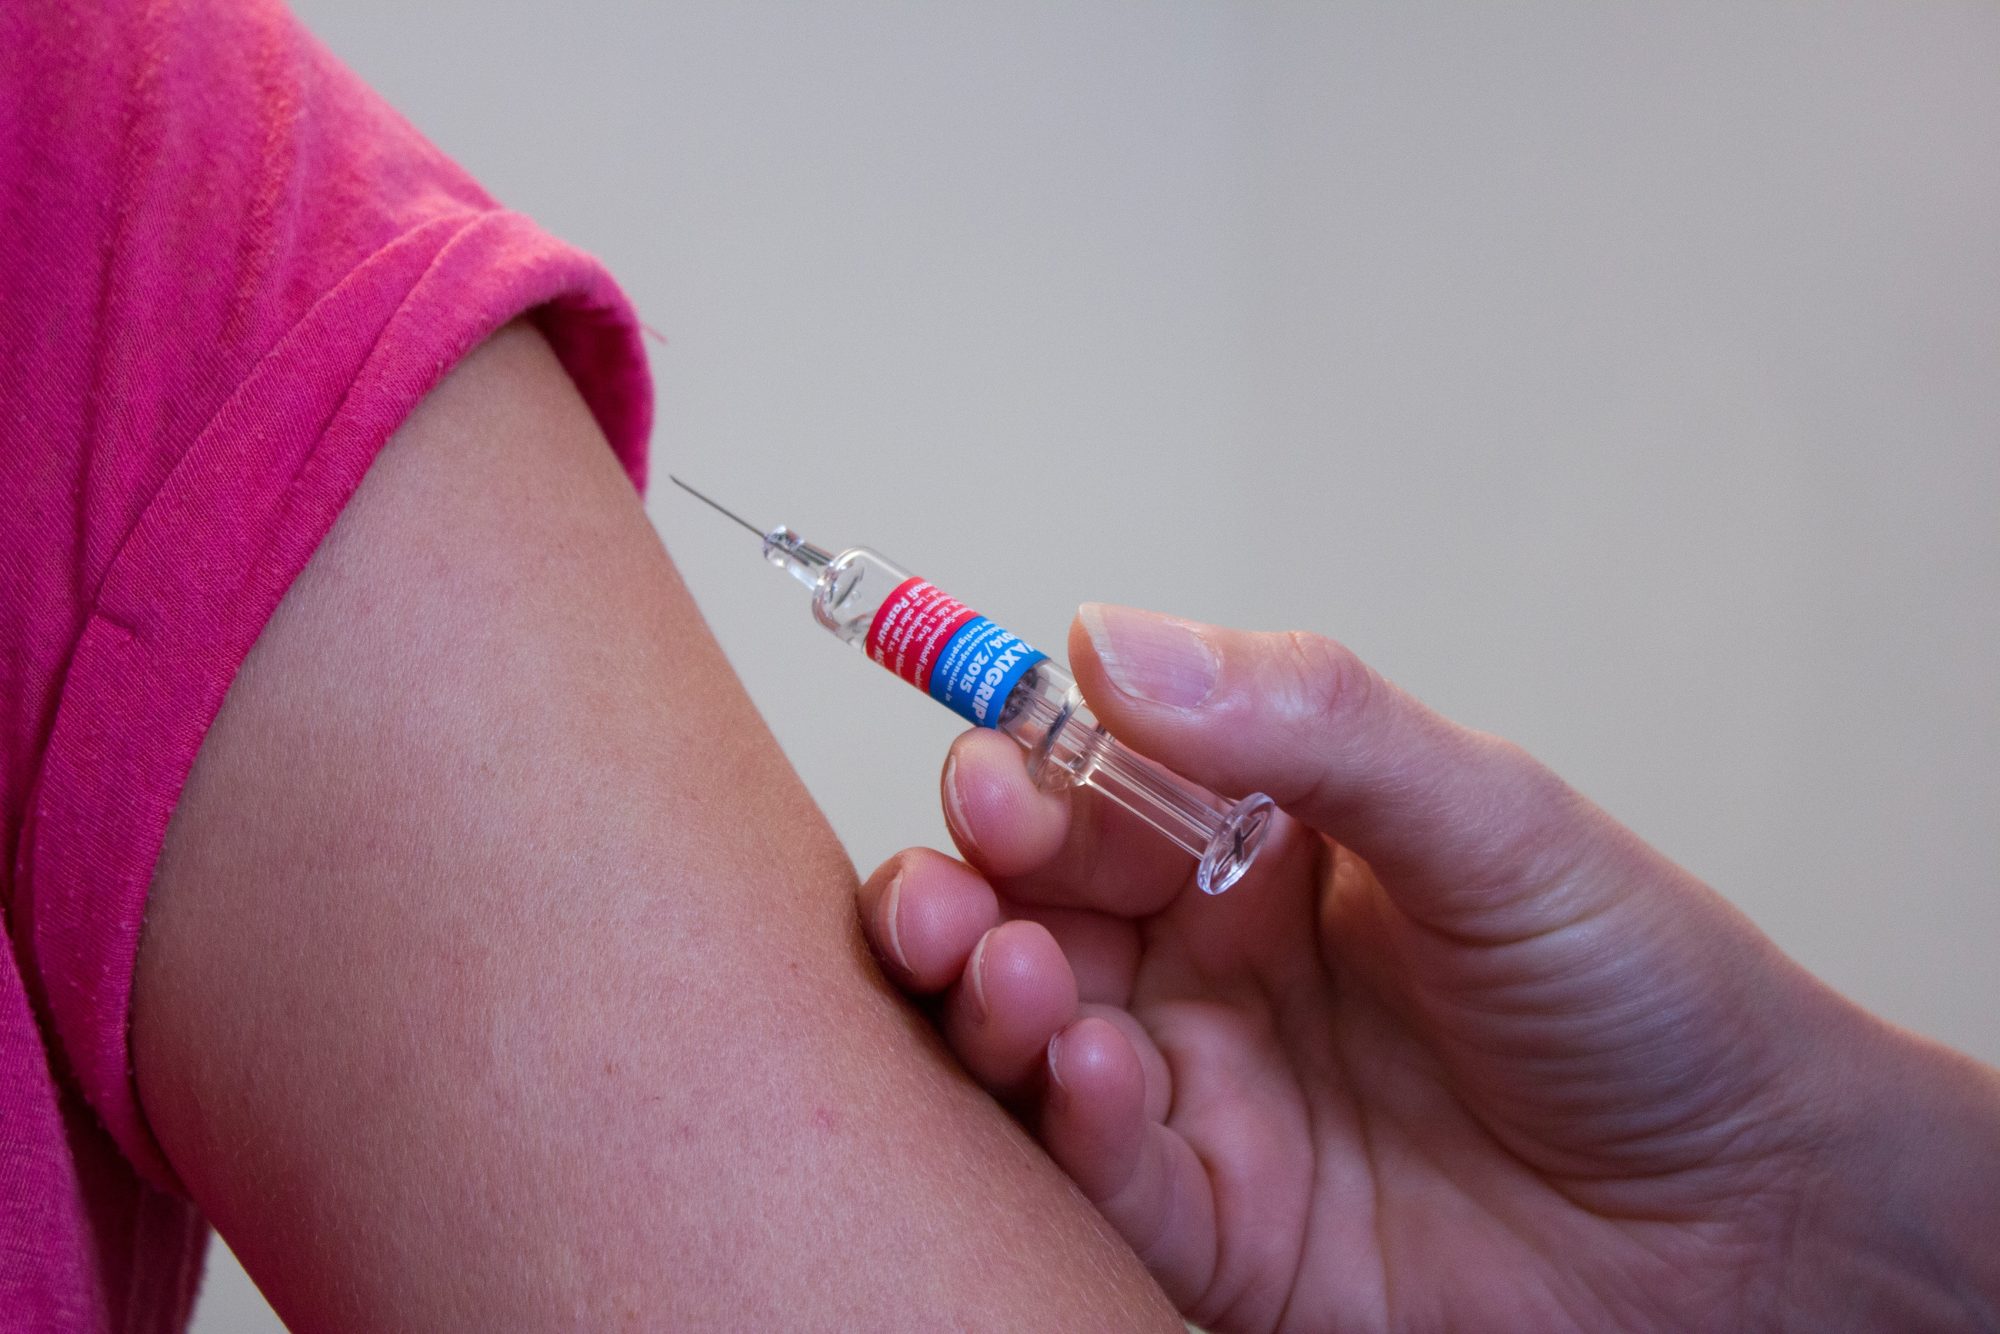 HPV Vaccine in Kenya : a 12 year old girl getting HPV vaccine in Kenya